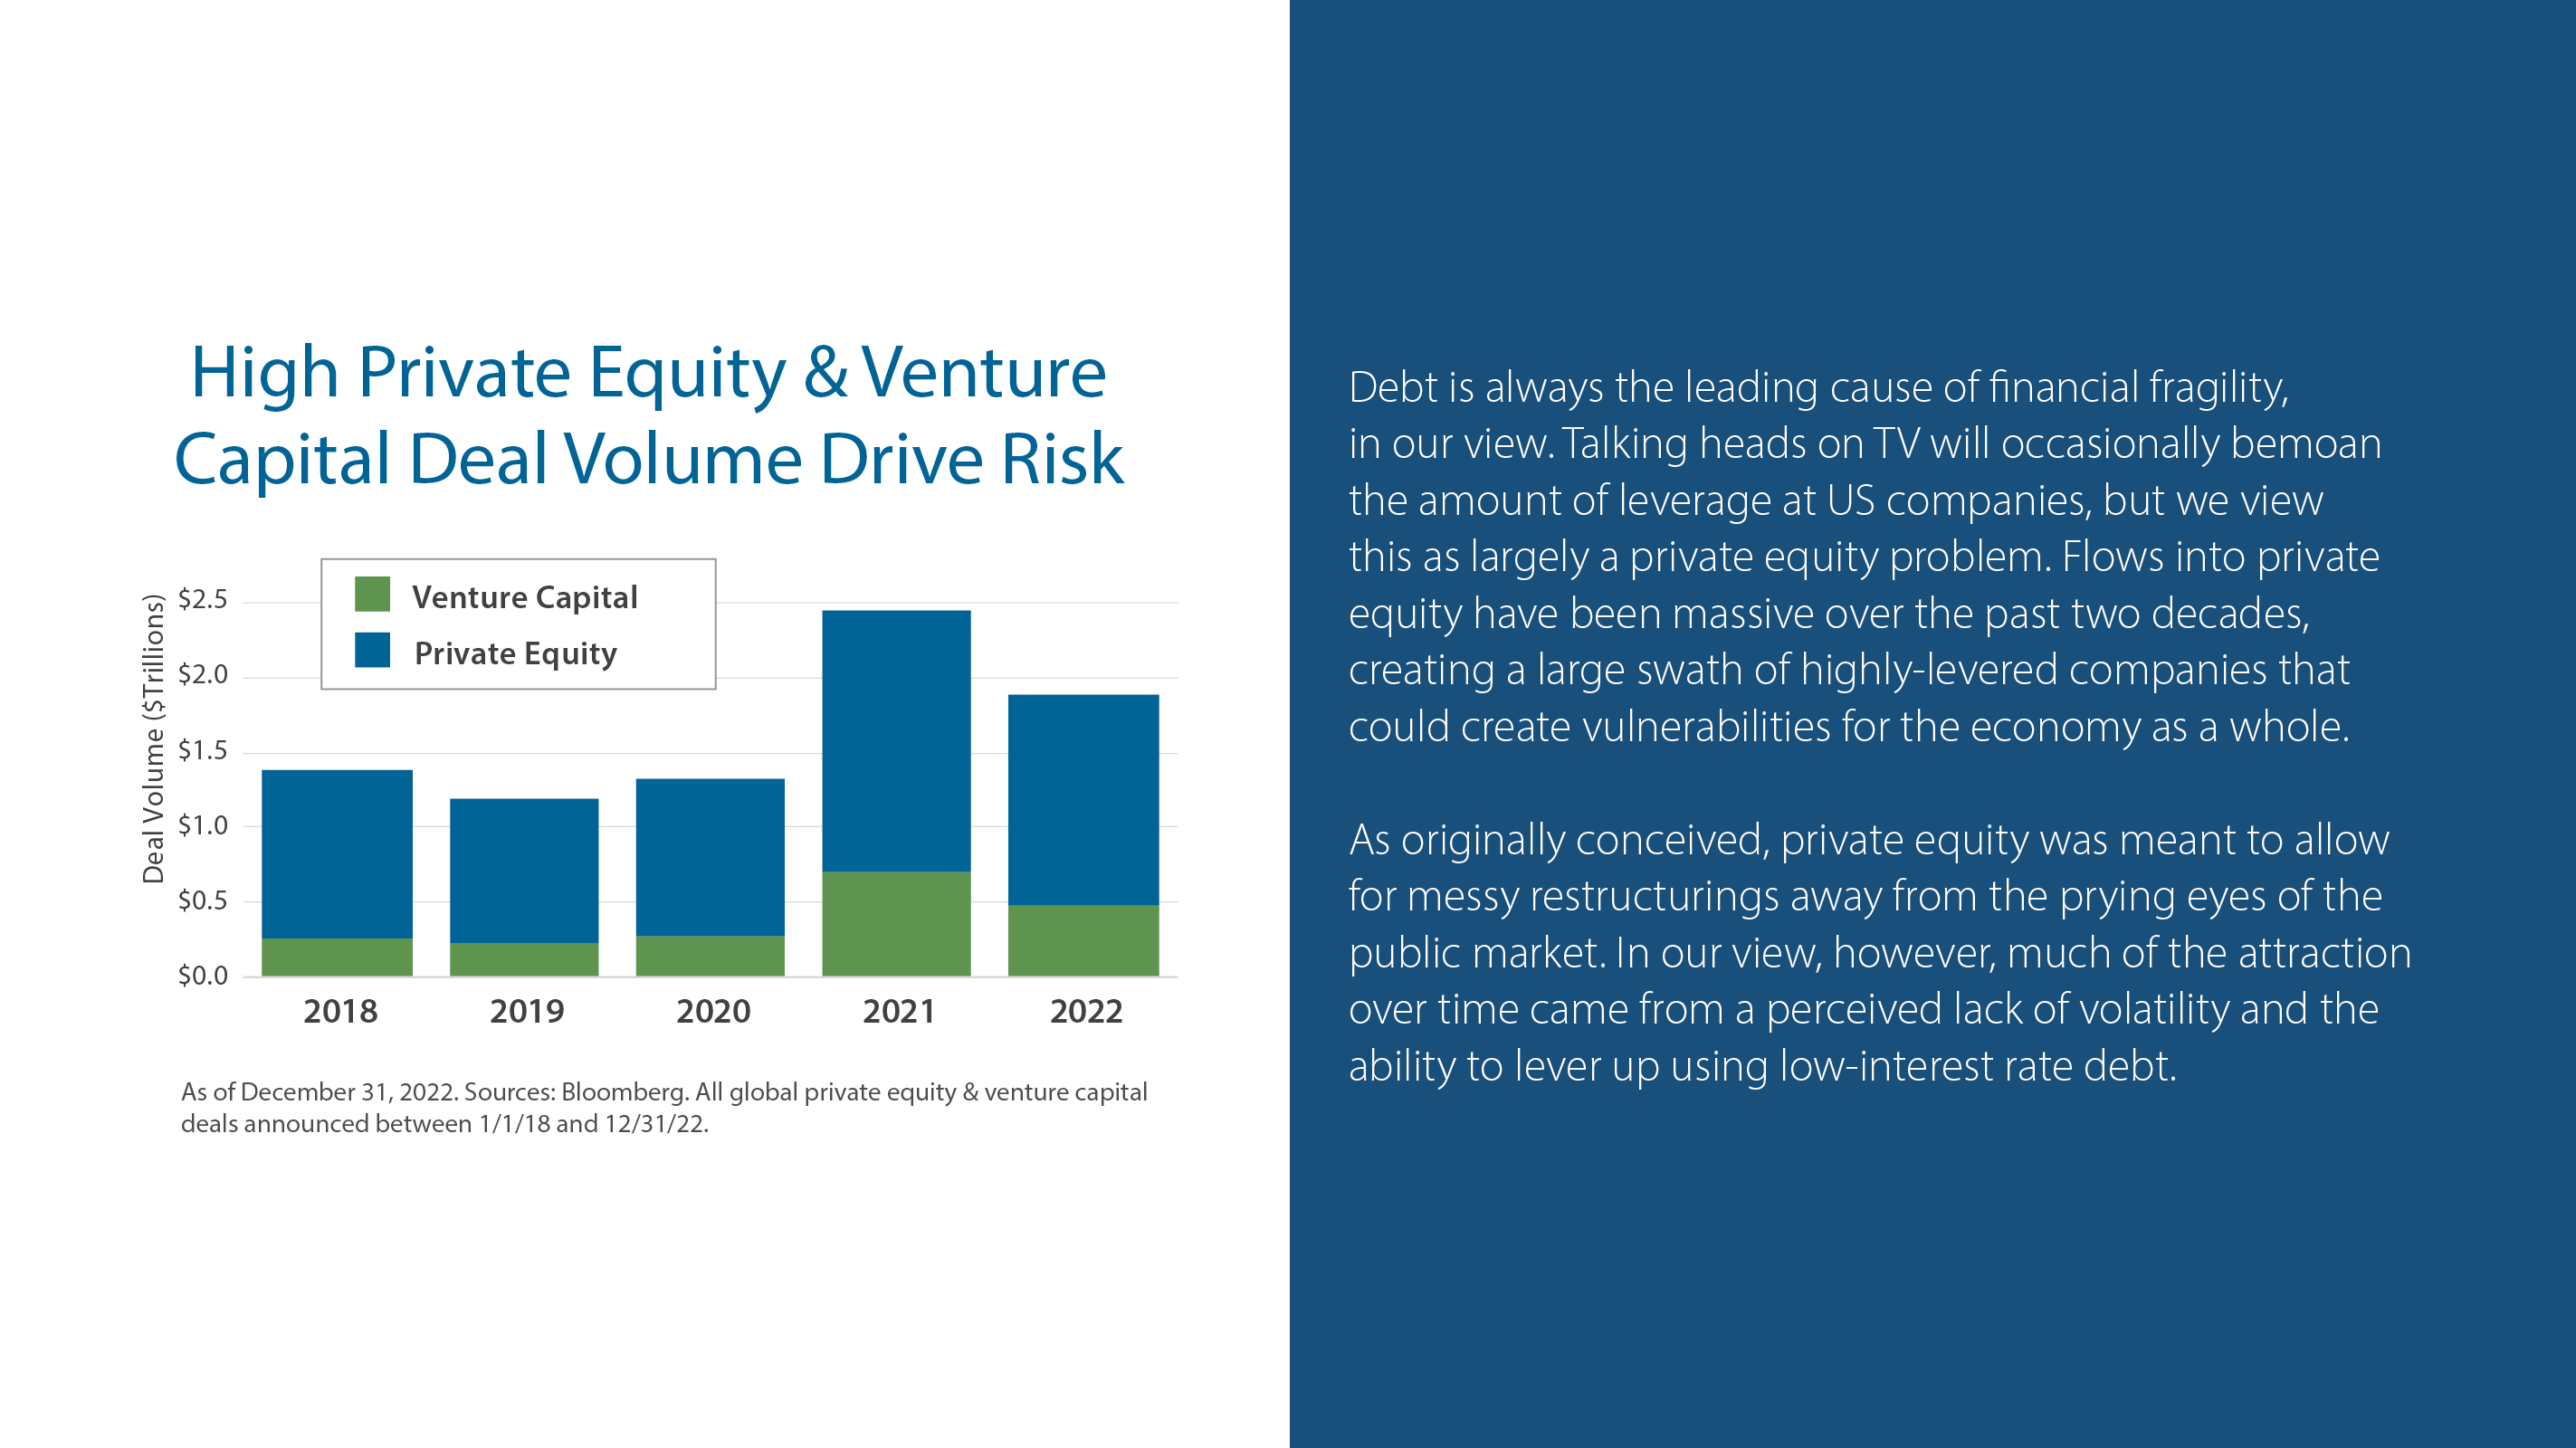 High Private Equity & Venture Capital Deal Volume Drive Risk